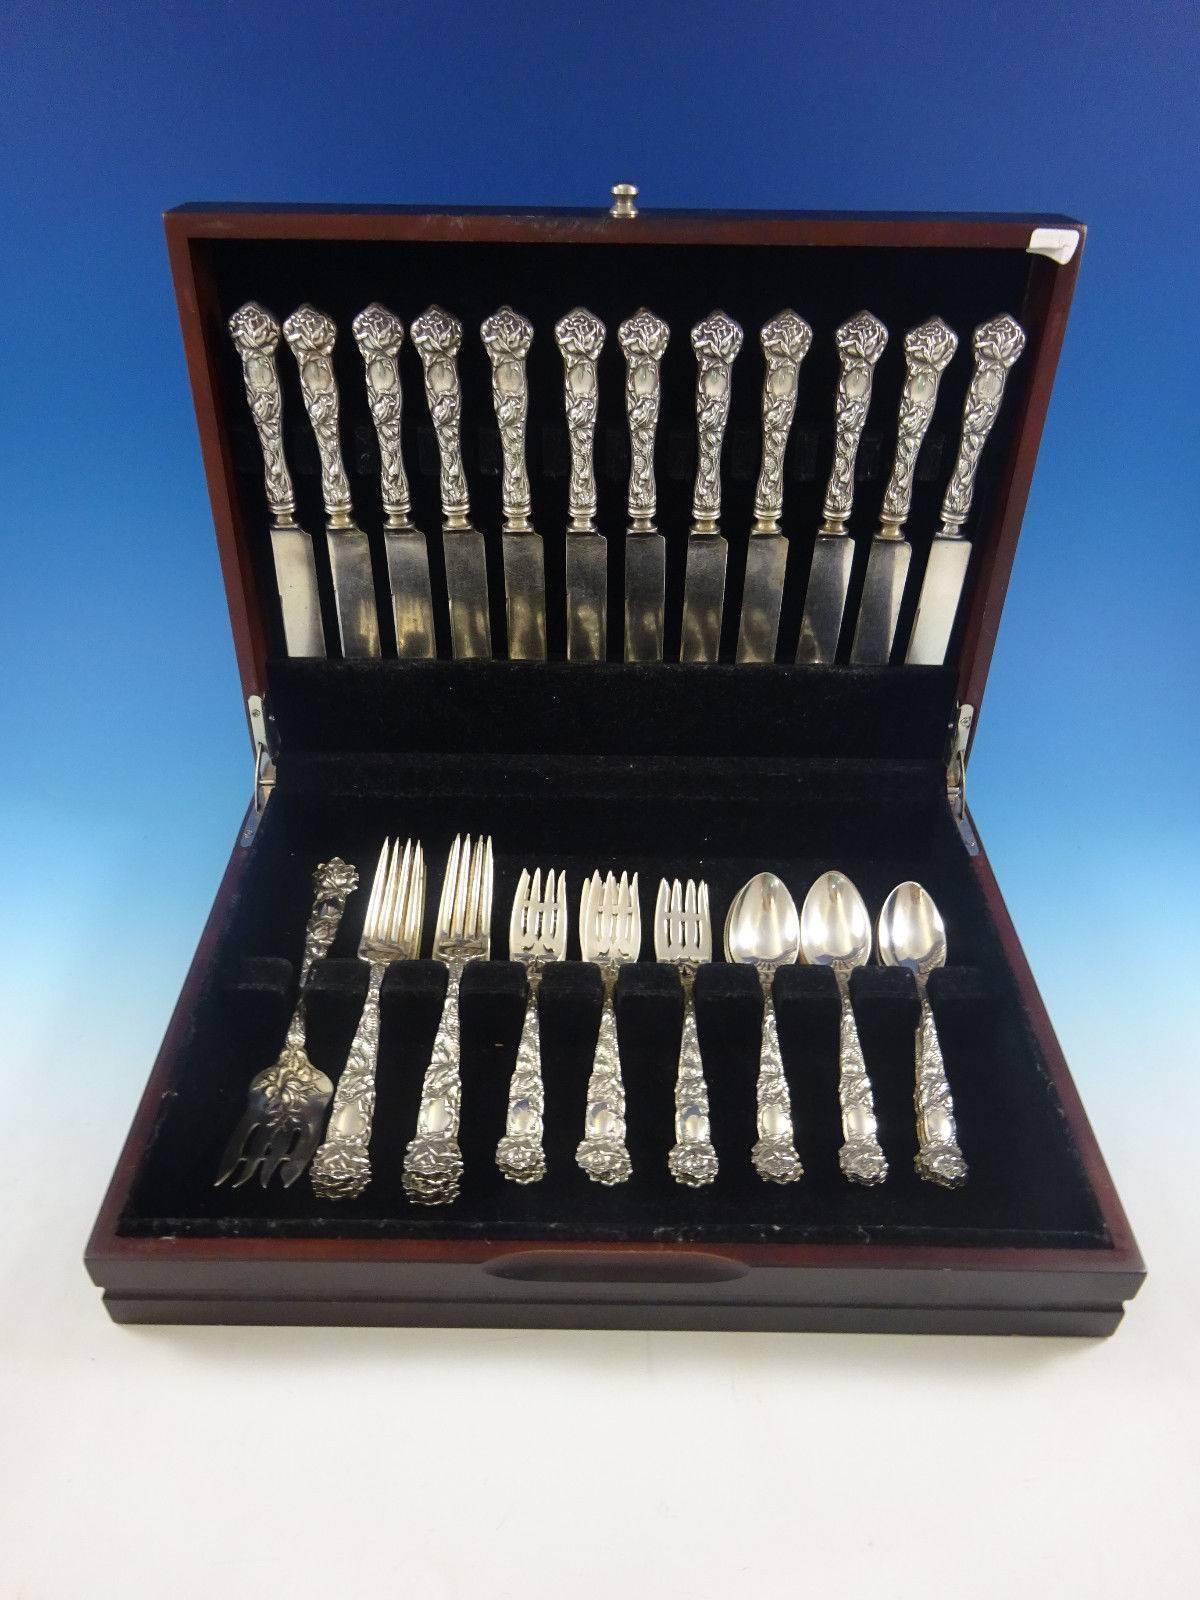 Beautiful Bridal Rose by Alvin sterling silver flatware set of 49 pieces. This set includes:

 Measures:
12 knives, blunt, 9